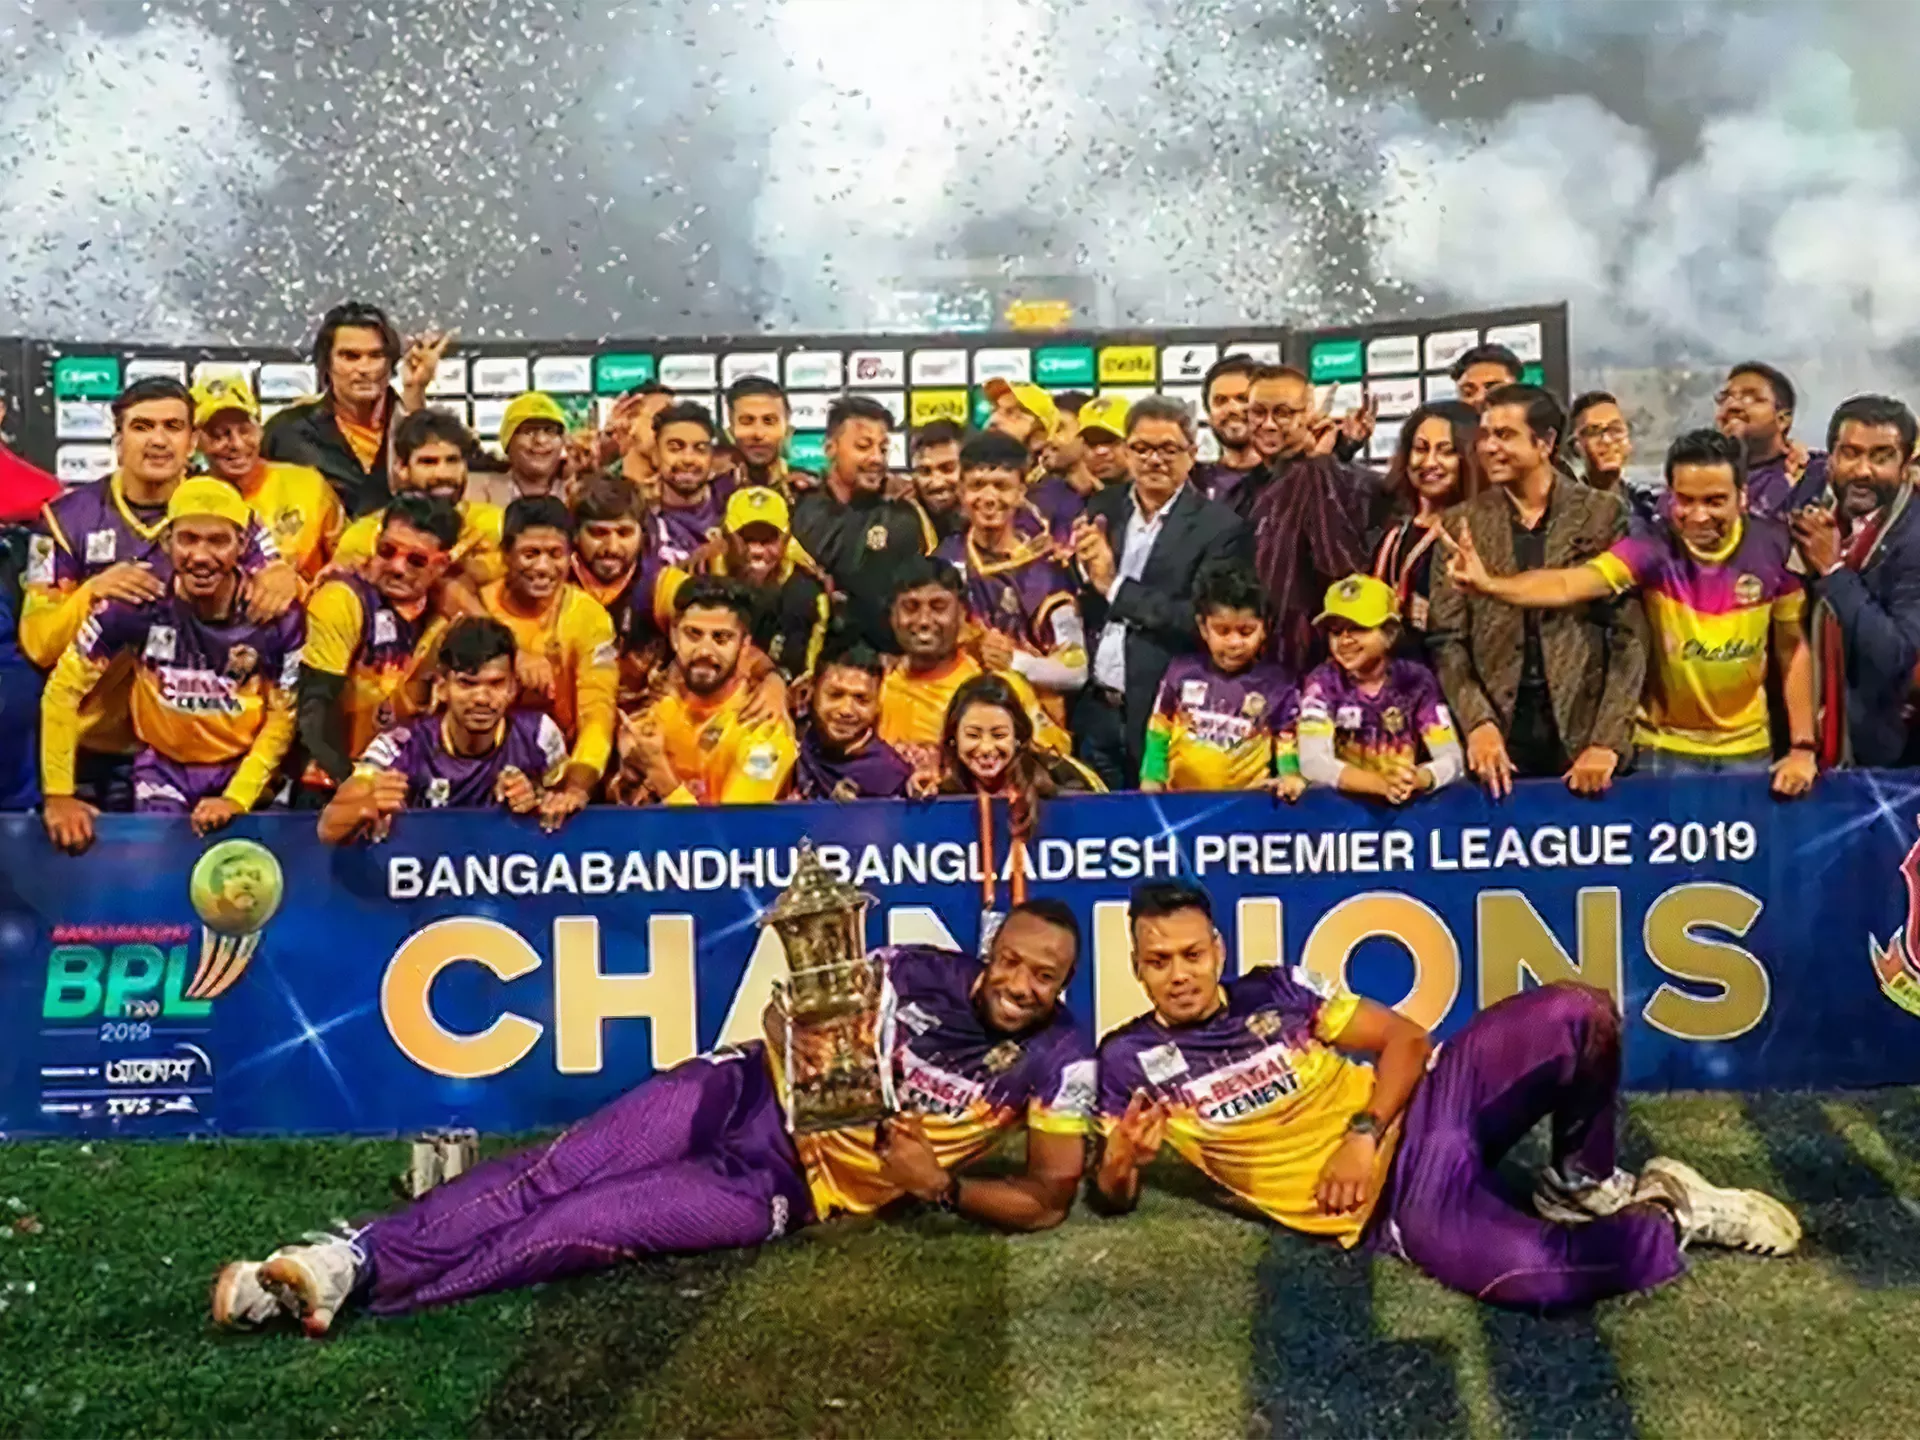 You can place bets on Bangladesh Premier League (BPL) after registering on the site.